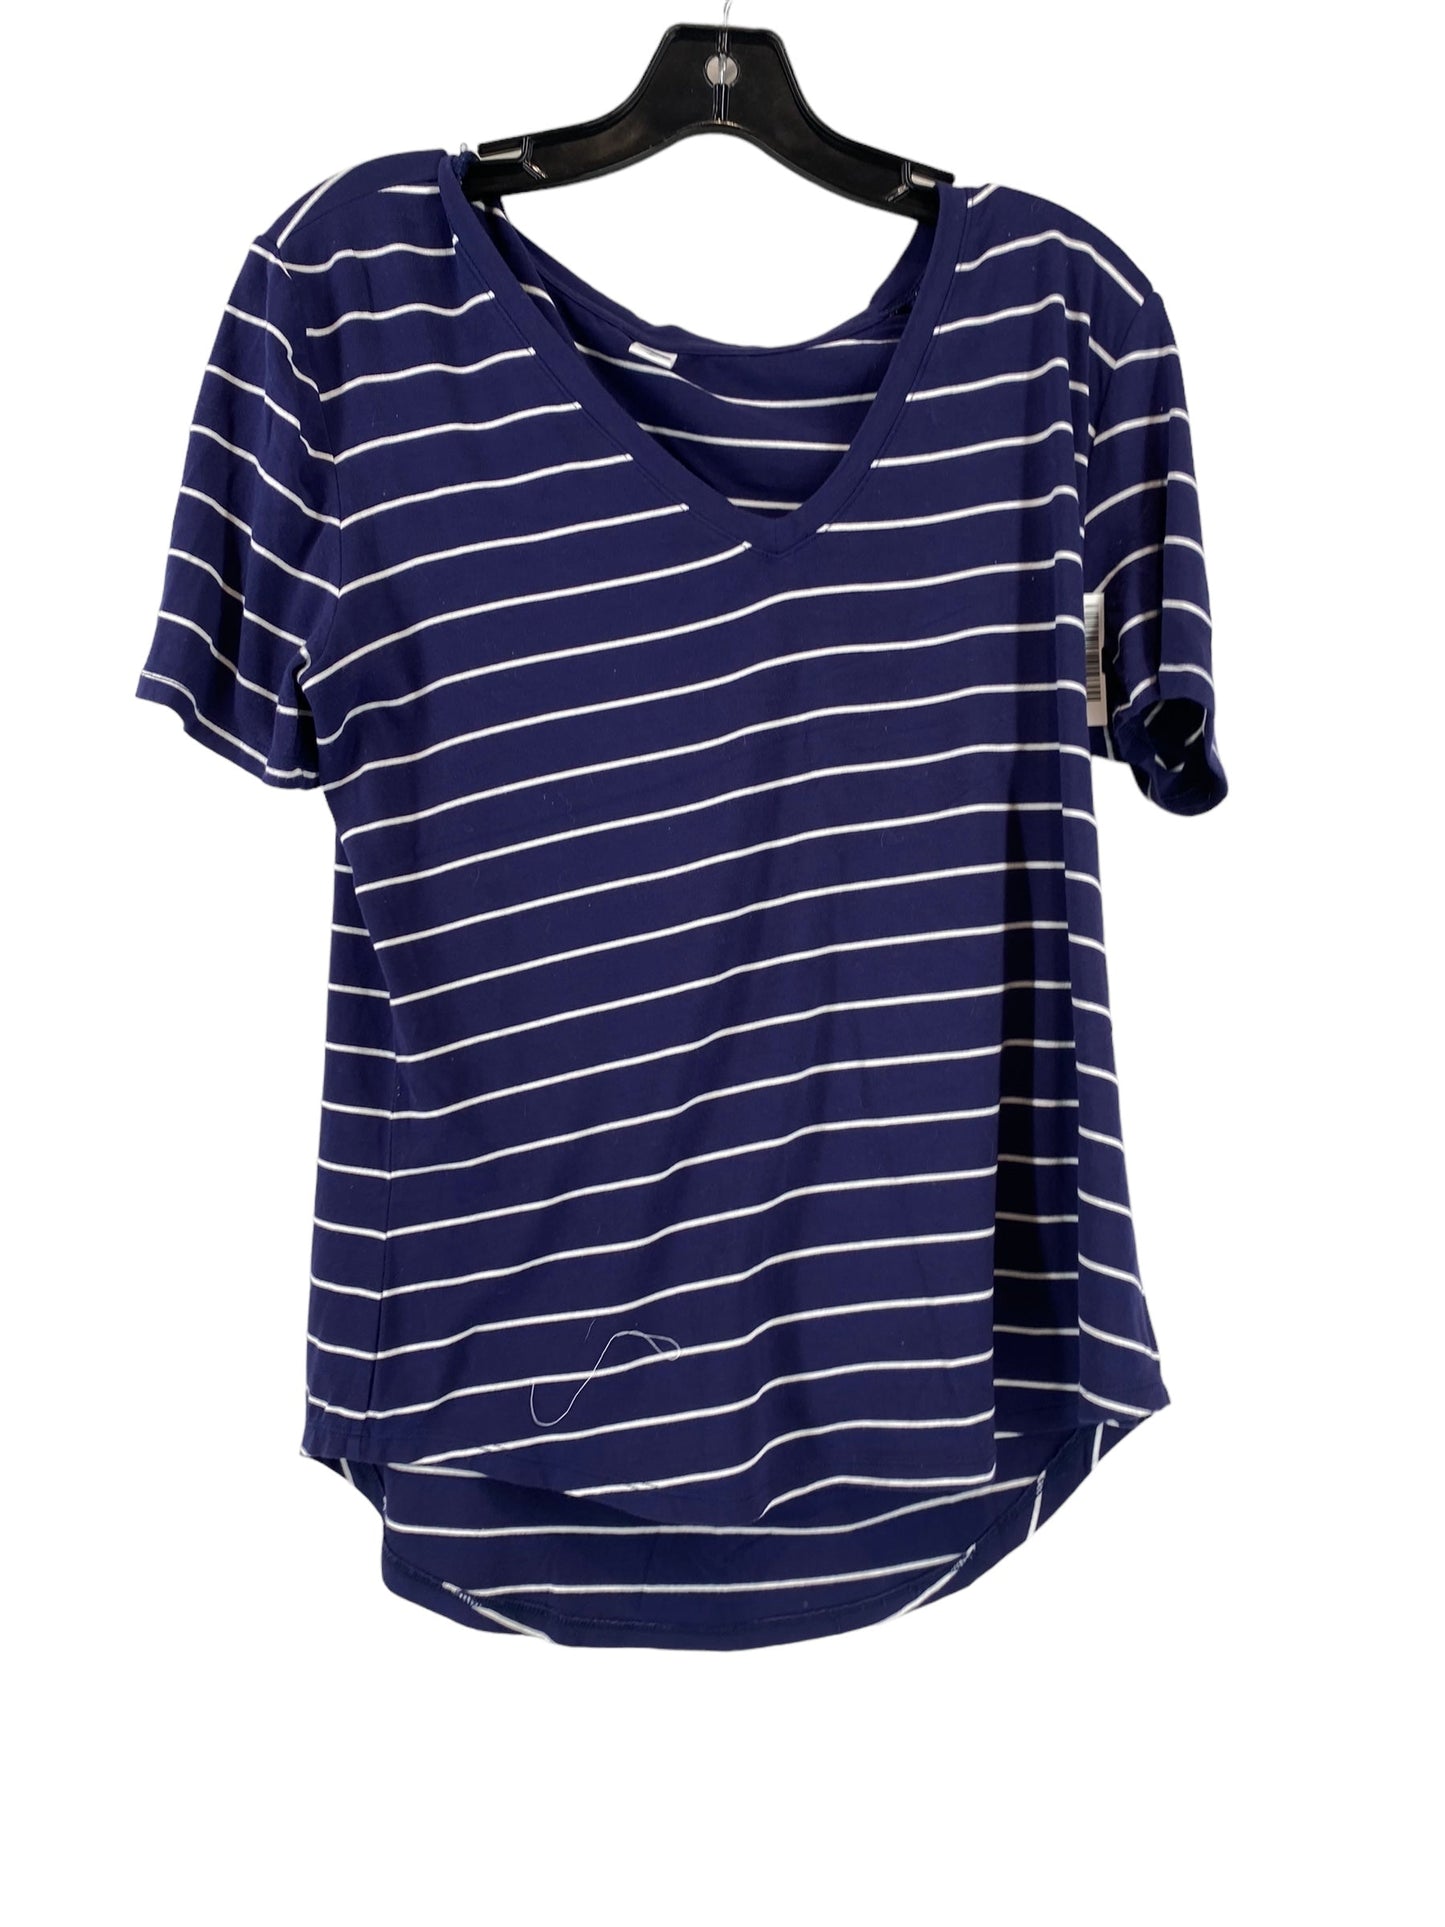 Navy Top Short Sleeve Old Navy, Size M